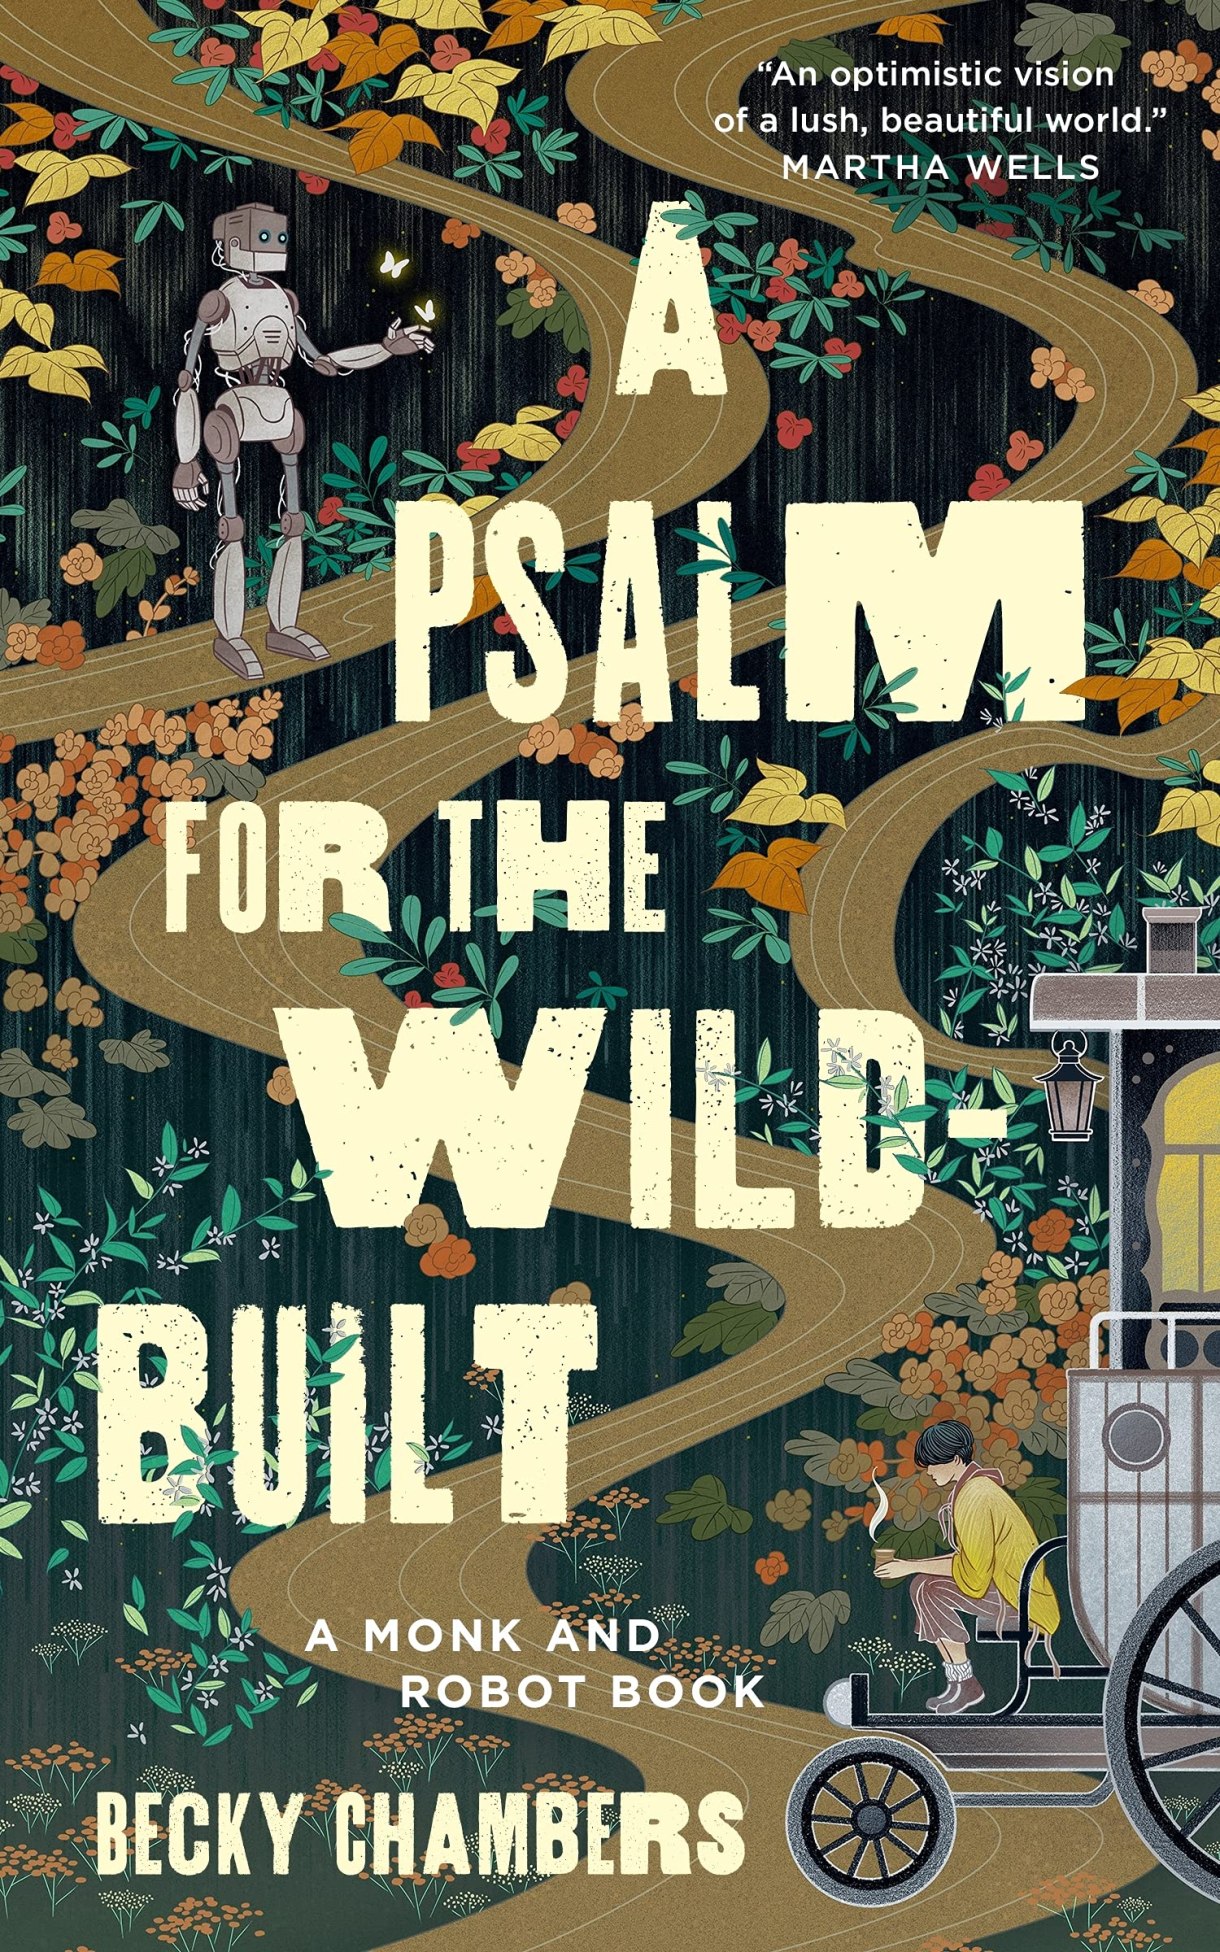 The cover of "A Psalm for the Wild-Built" which shows a robot encountering a tea monk against a gorgeous vegetal backdrop.